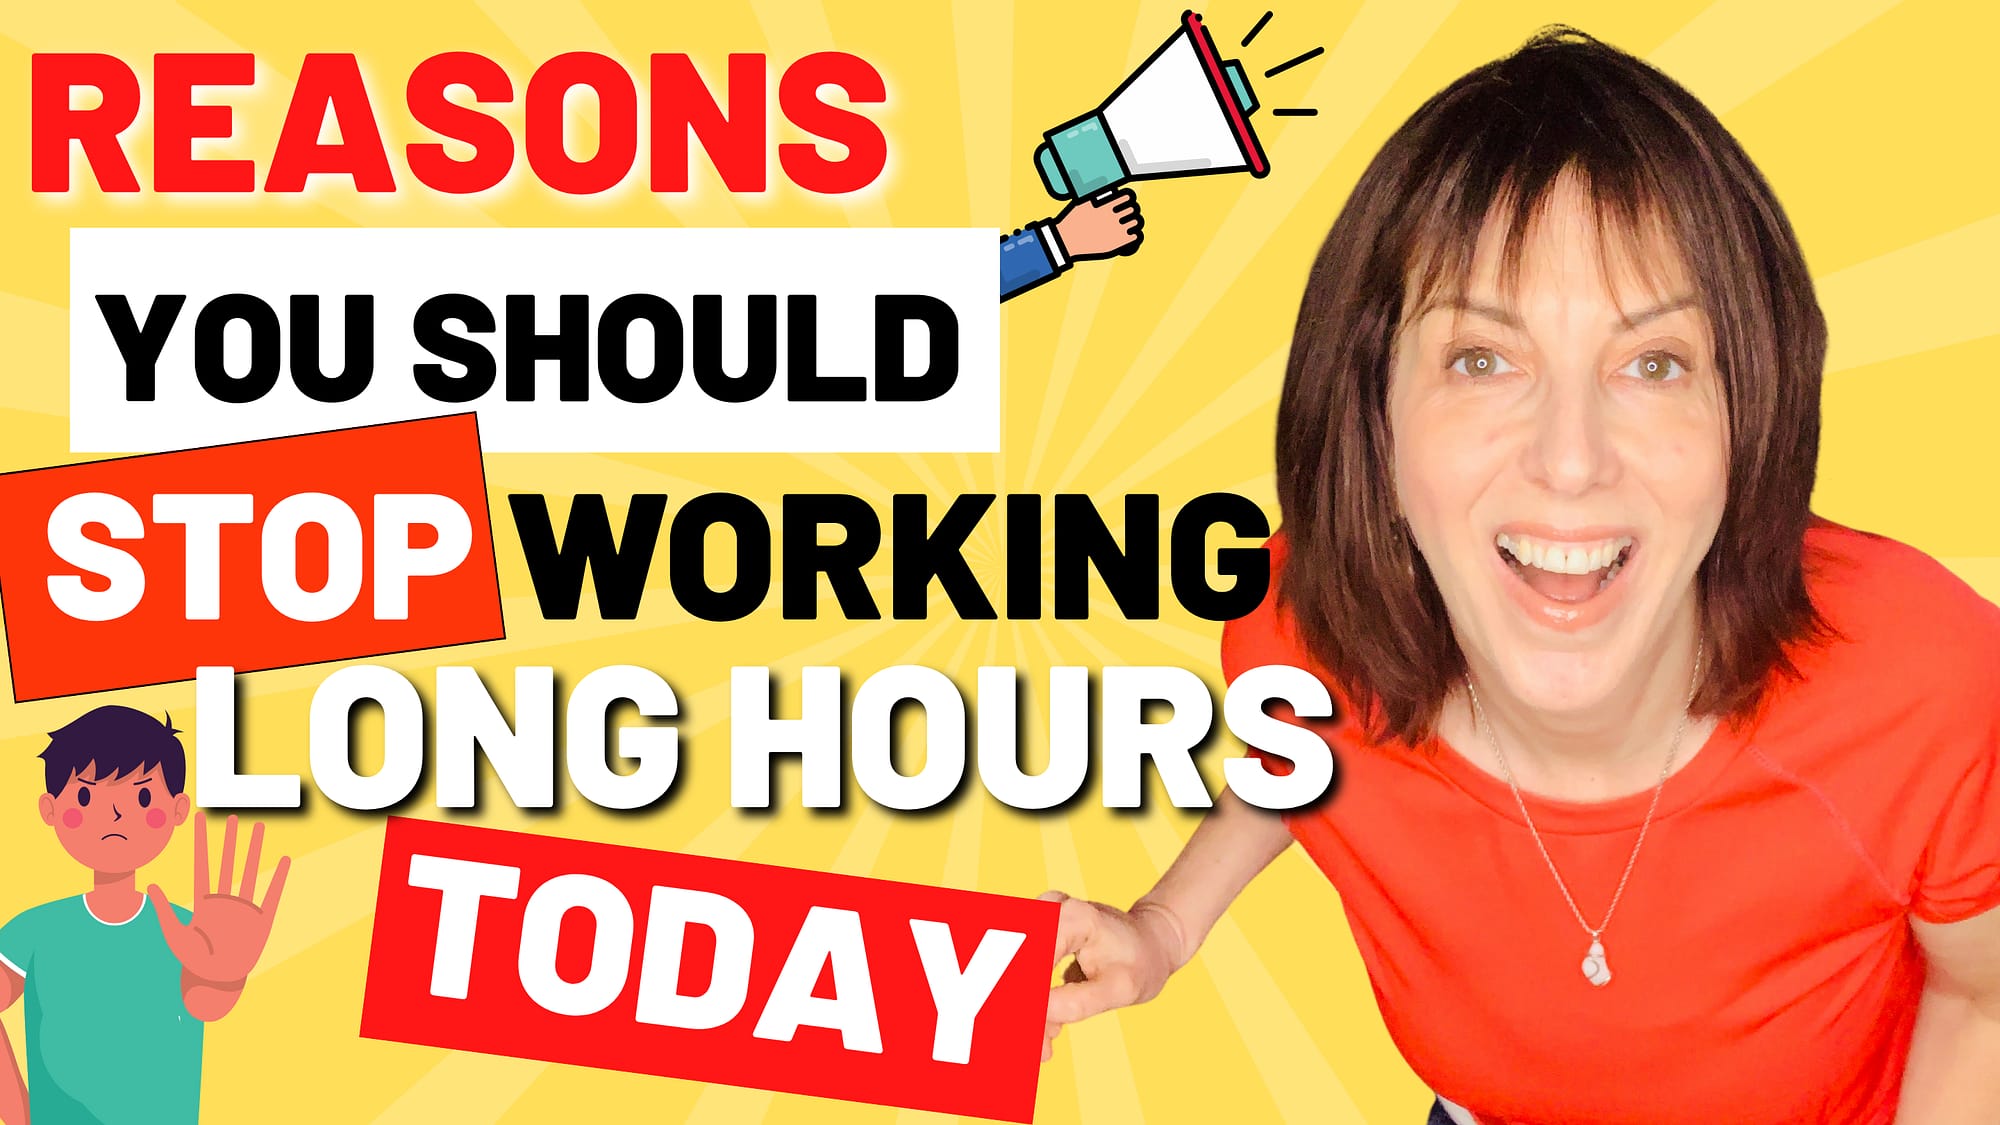 Reasons You Should Stop Working Long Hours Today